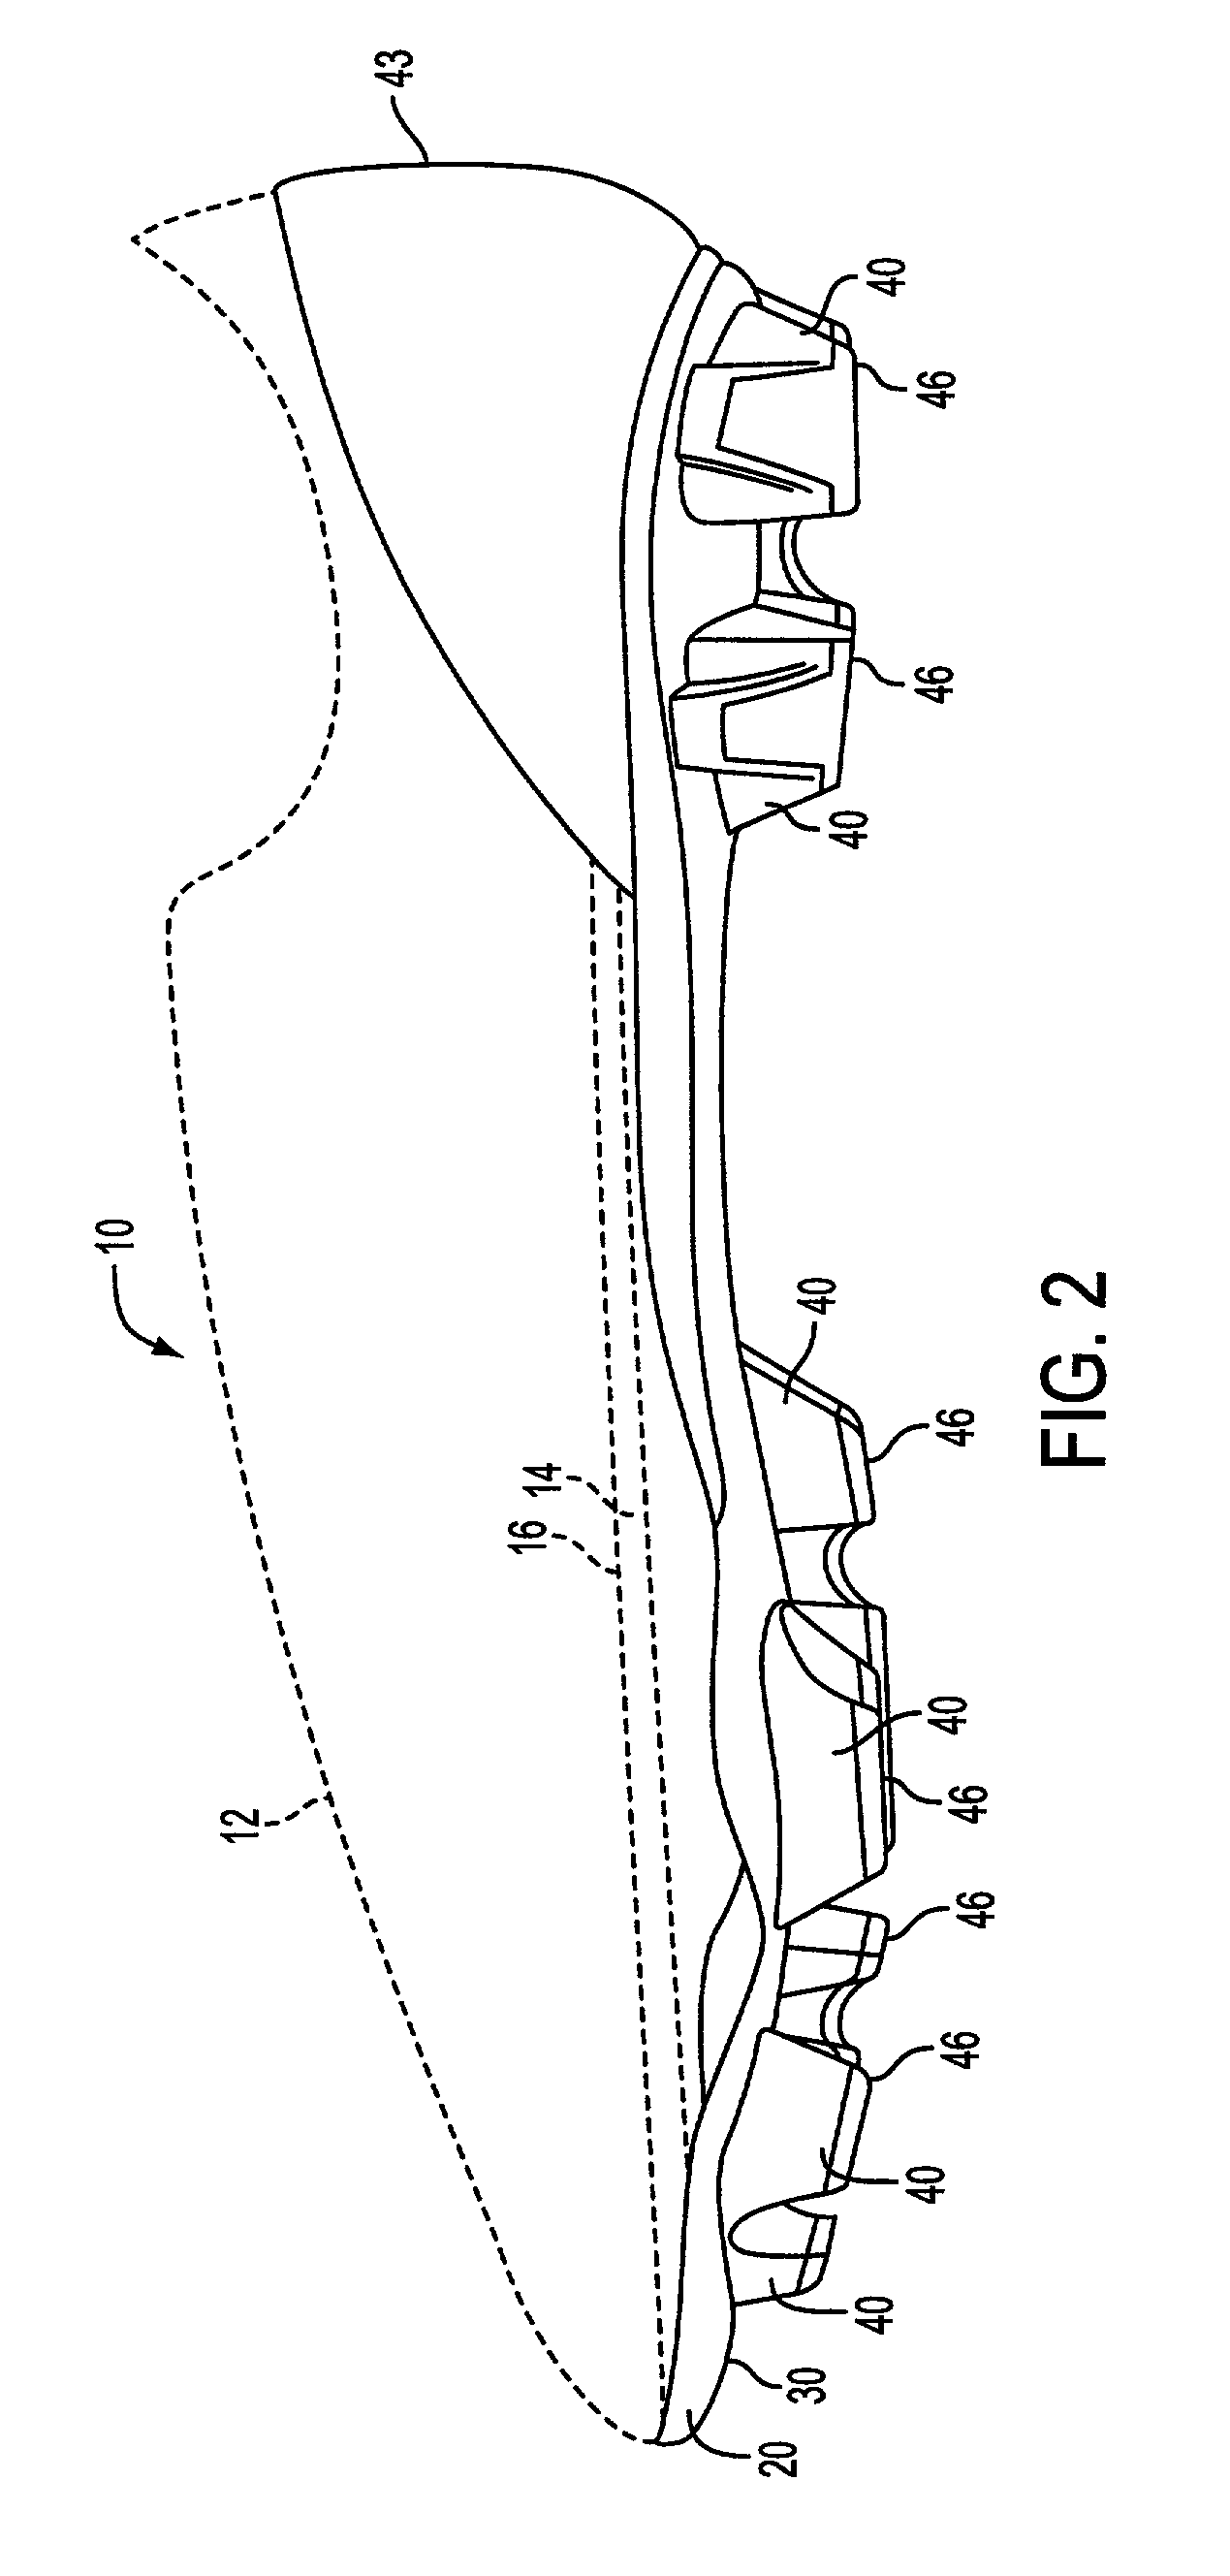 Article of footwear having a sole with a flex control member